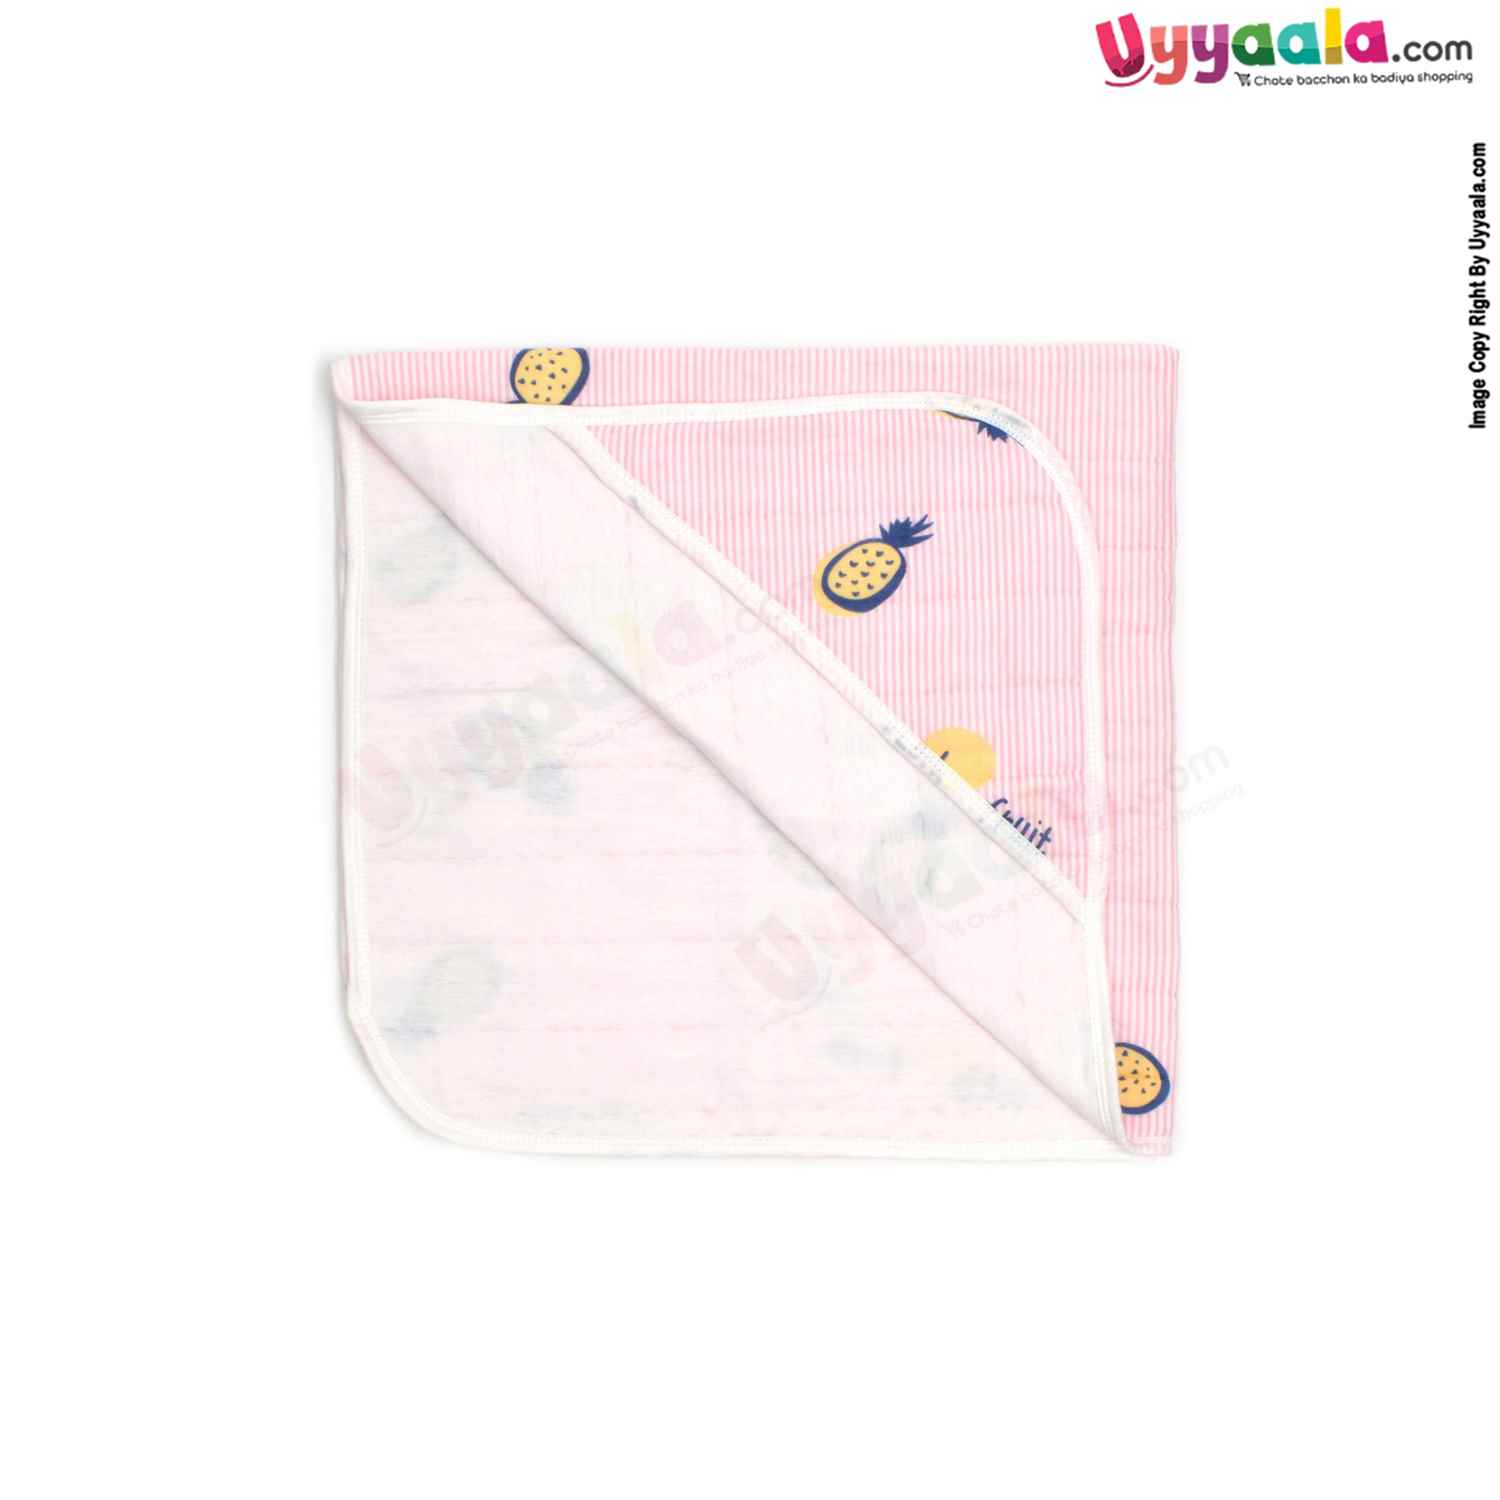 Double Layered Hooded Swaddle Wrapper with Stuff & Waist Belt Pineapple Print for Babies 0+m Age, Size (92*88cm)-Pink